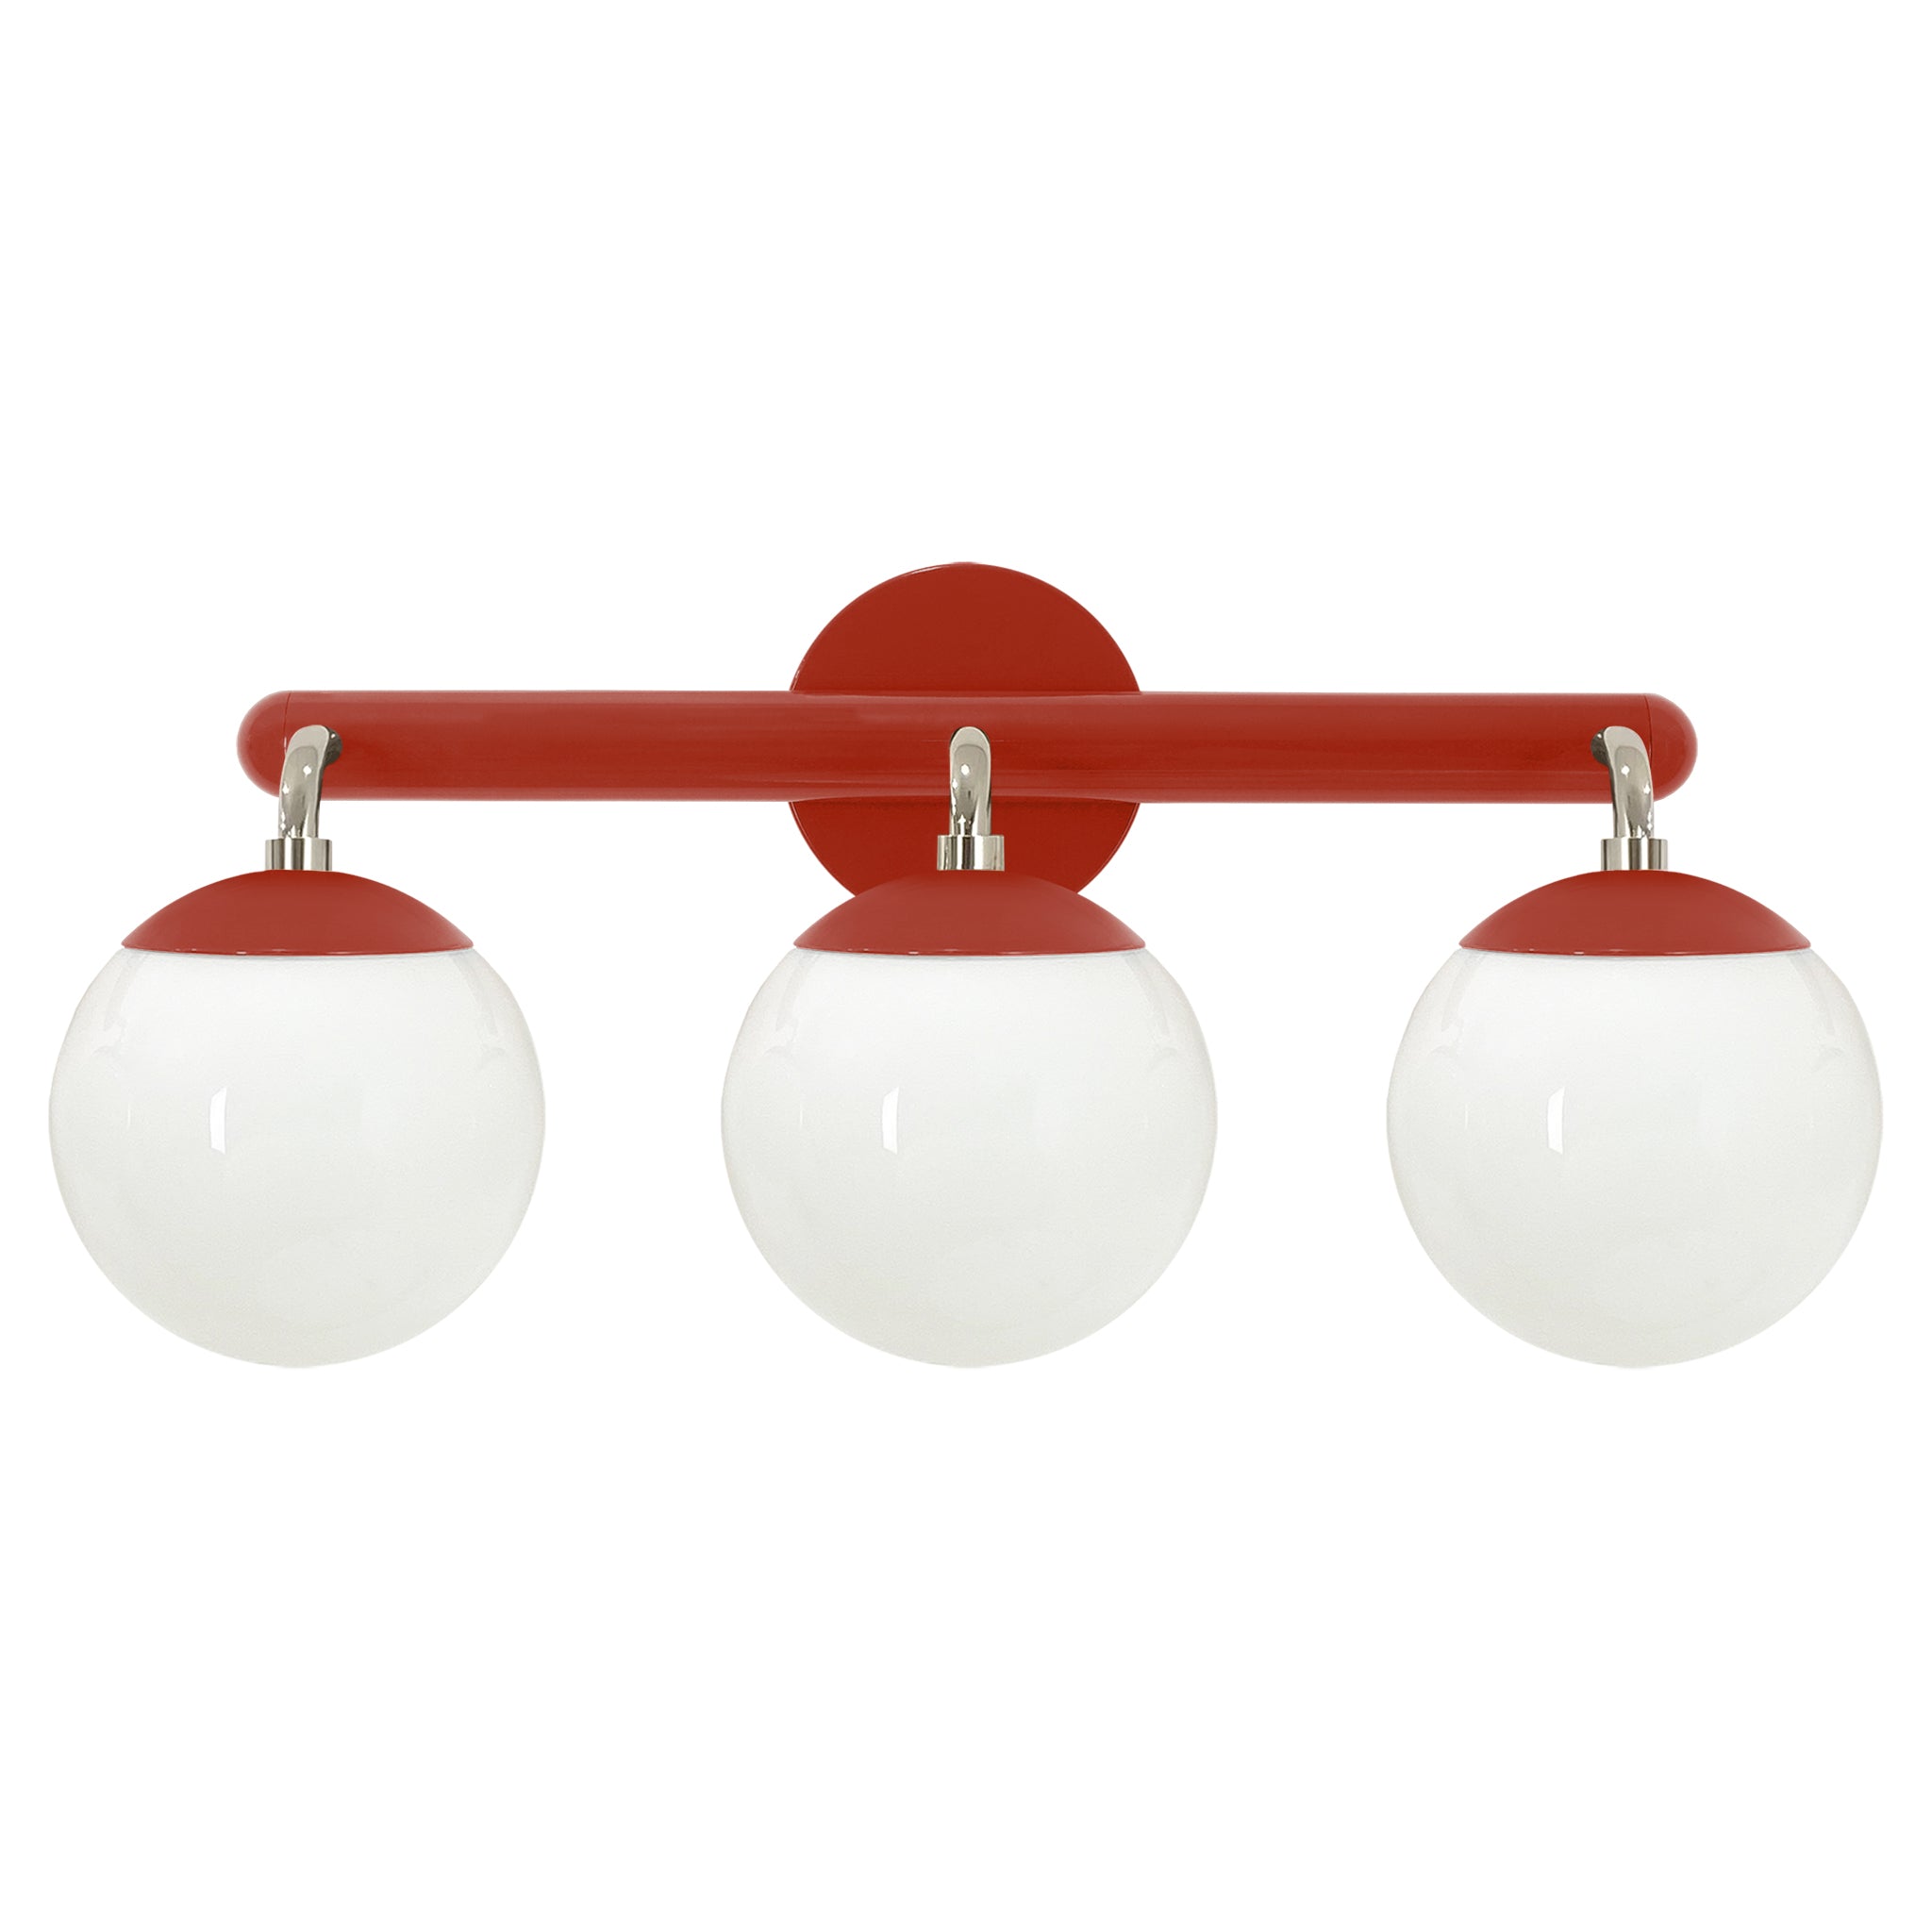 Nickel and riding hood red color Legend 3 sconce Dutton Brown lighting